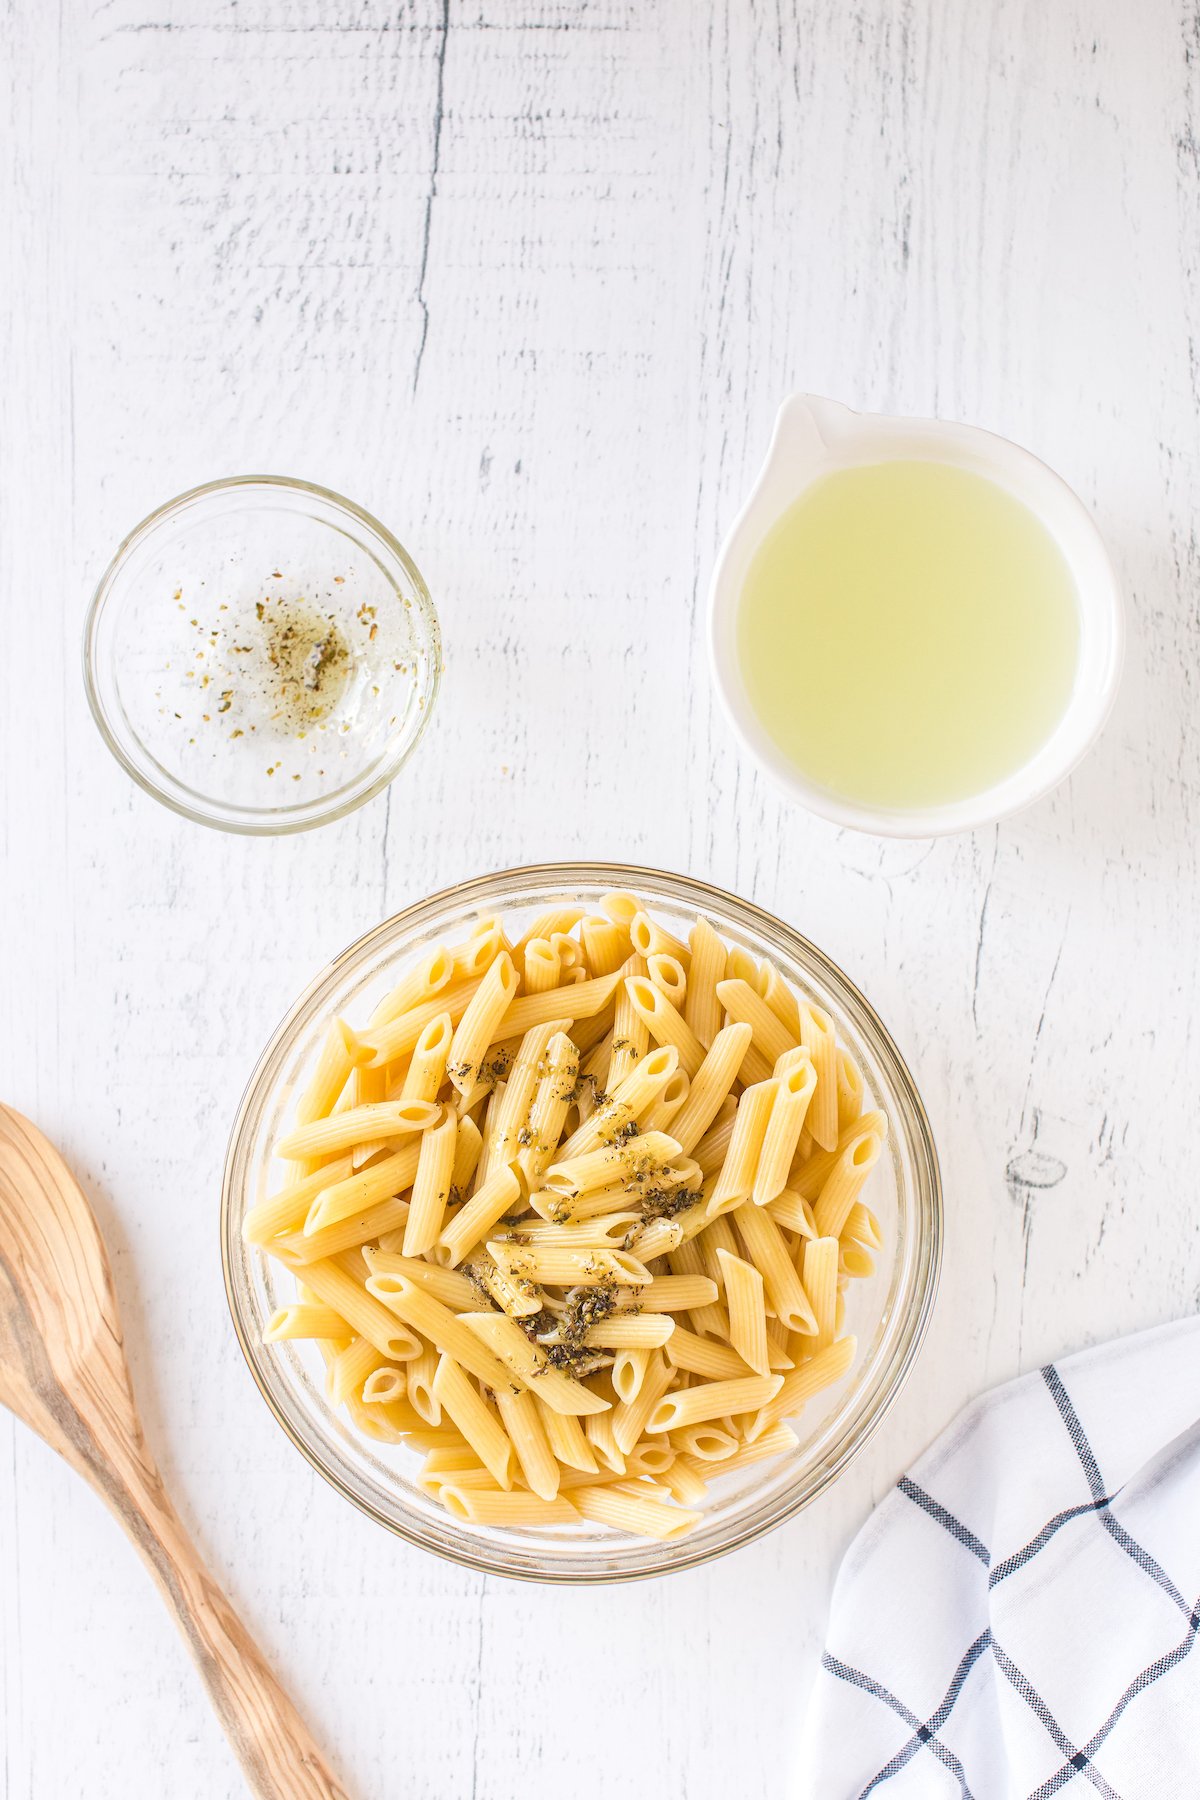 Penne pasta with herbs in a bowl.